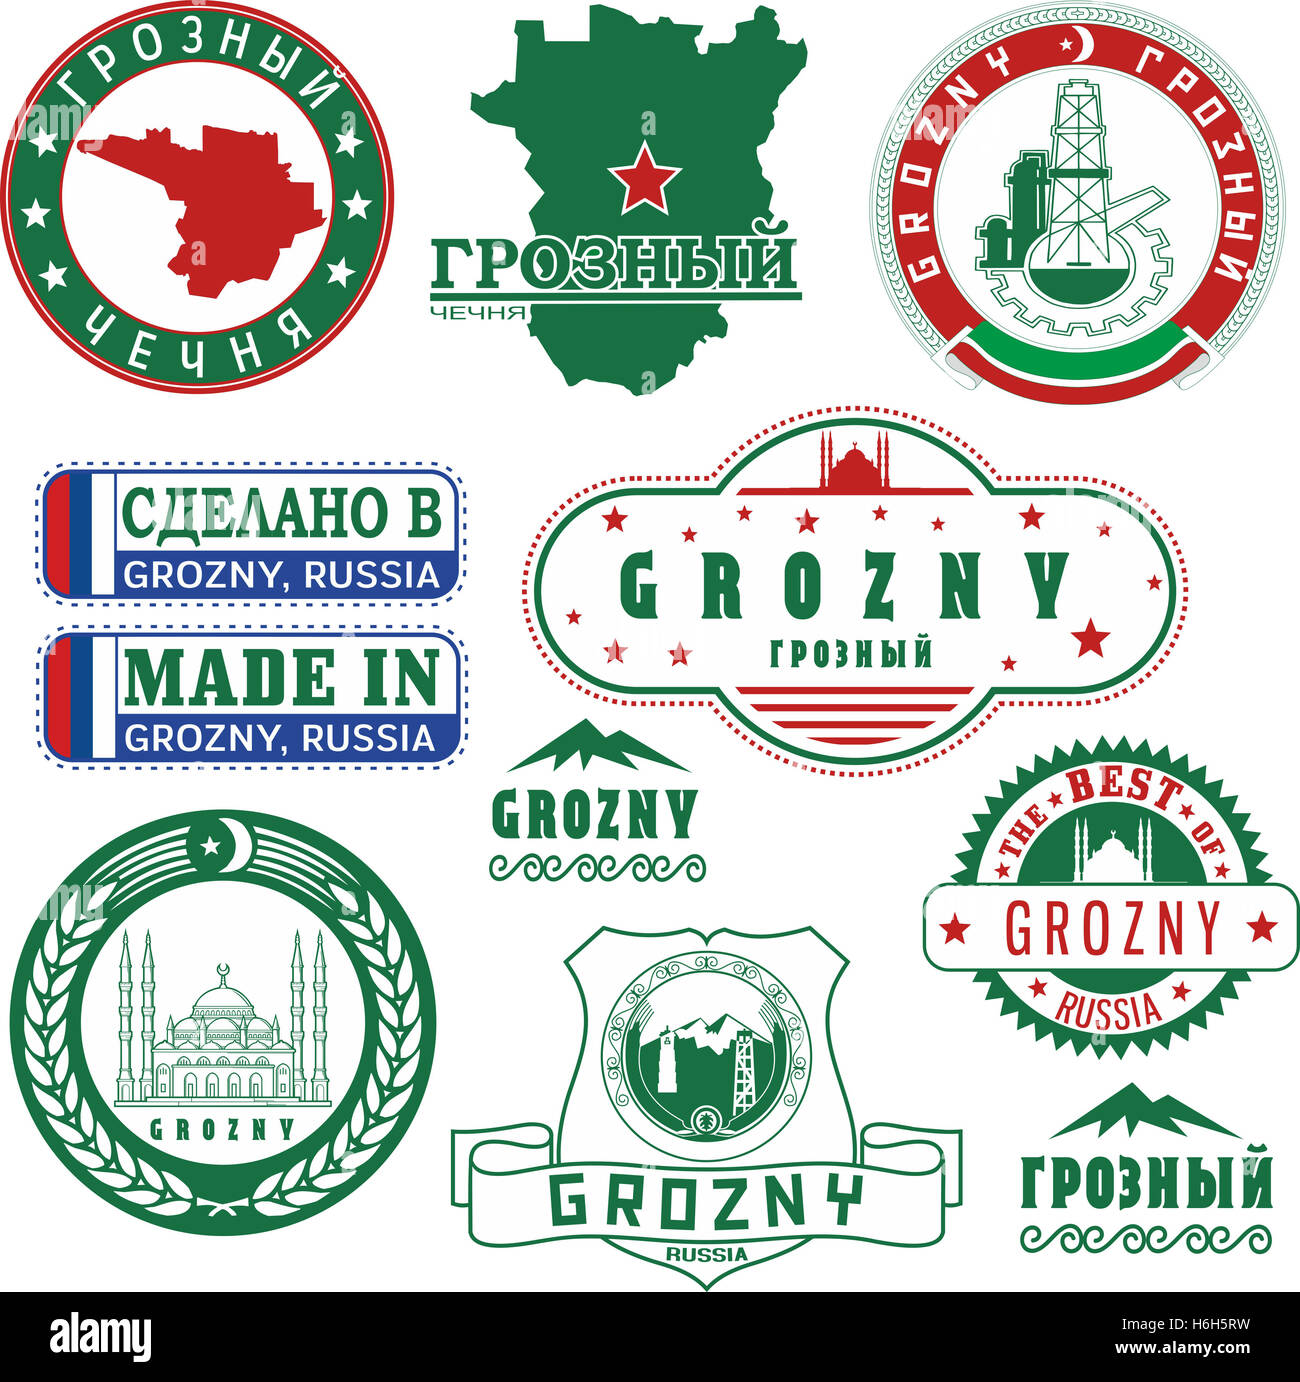 Grozny, Russia. Set of generic stamps and signs including elements of Grozny city coat of arms and location of the city on Chech Stock Photo